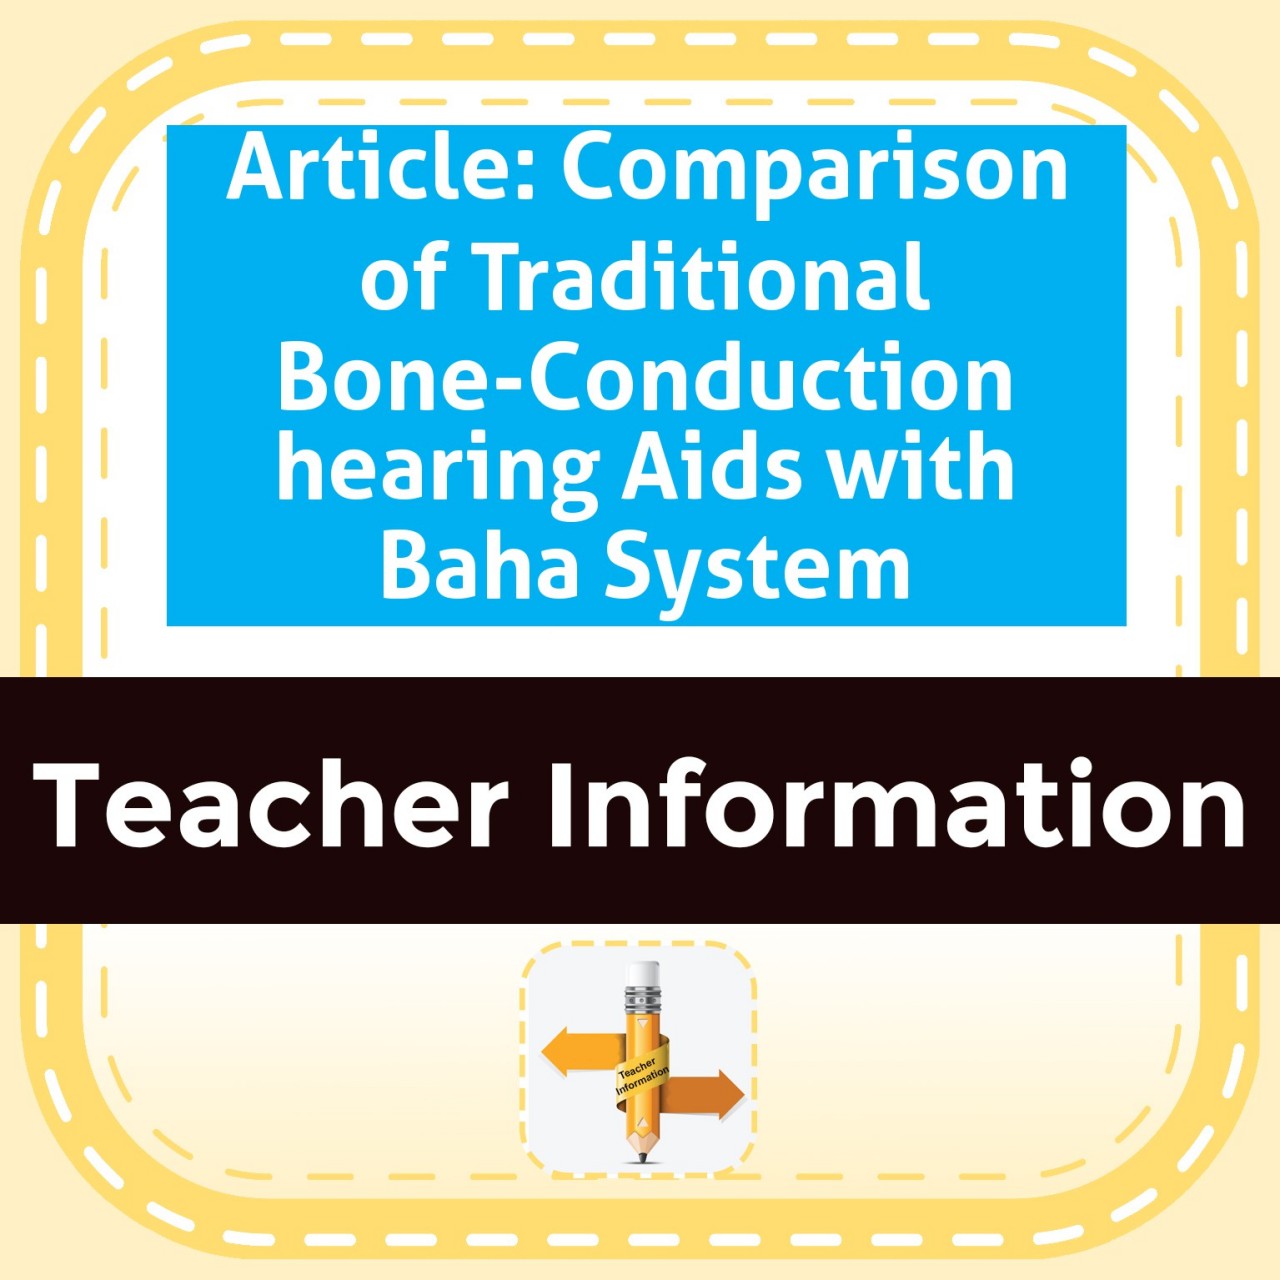 Article: Comparison of Traditional Bone-Conduction hearing Aids with Baha System